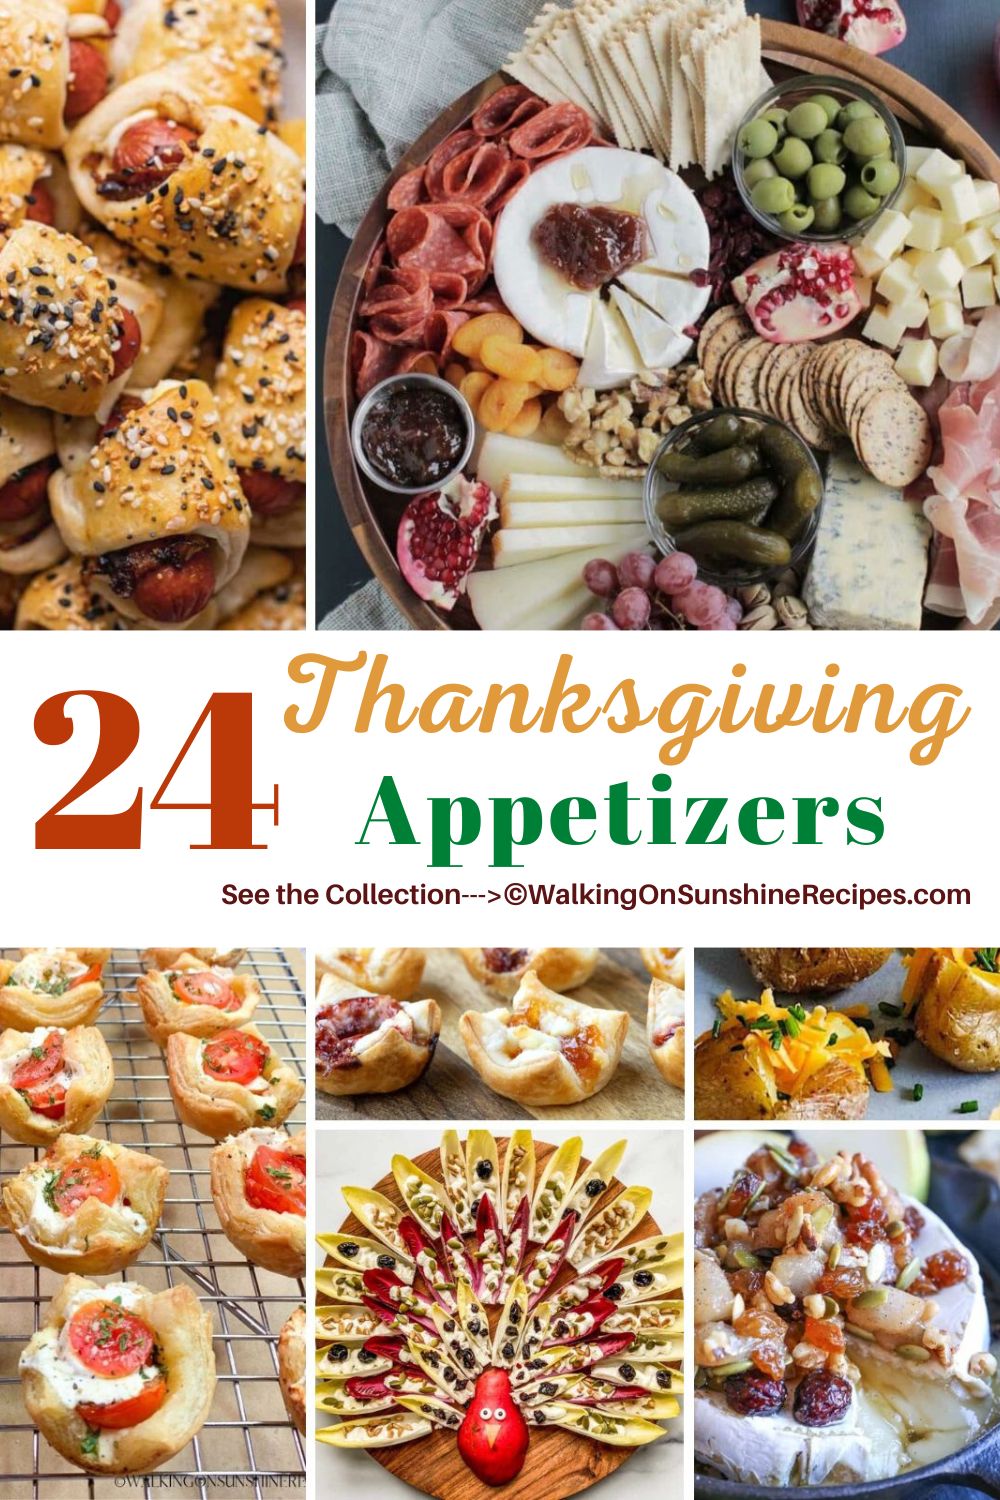 Appetizers for Thanksgiving - Walking On Sunshine Recipes